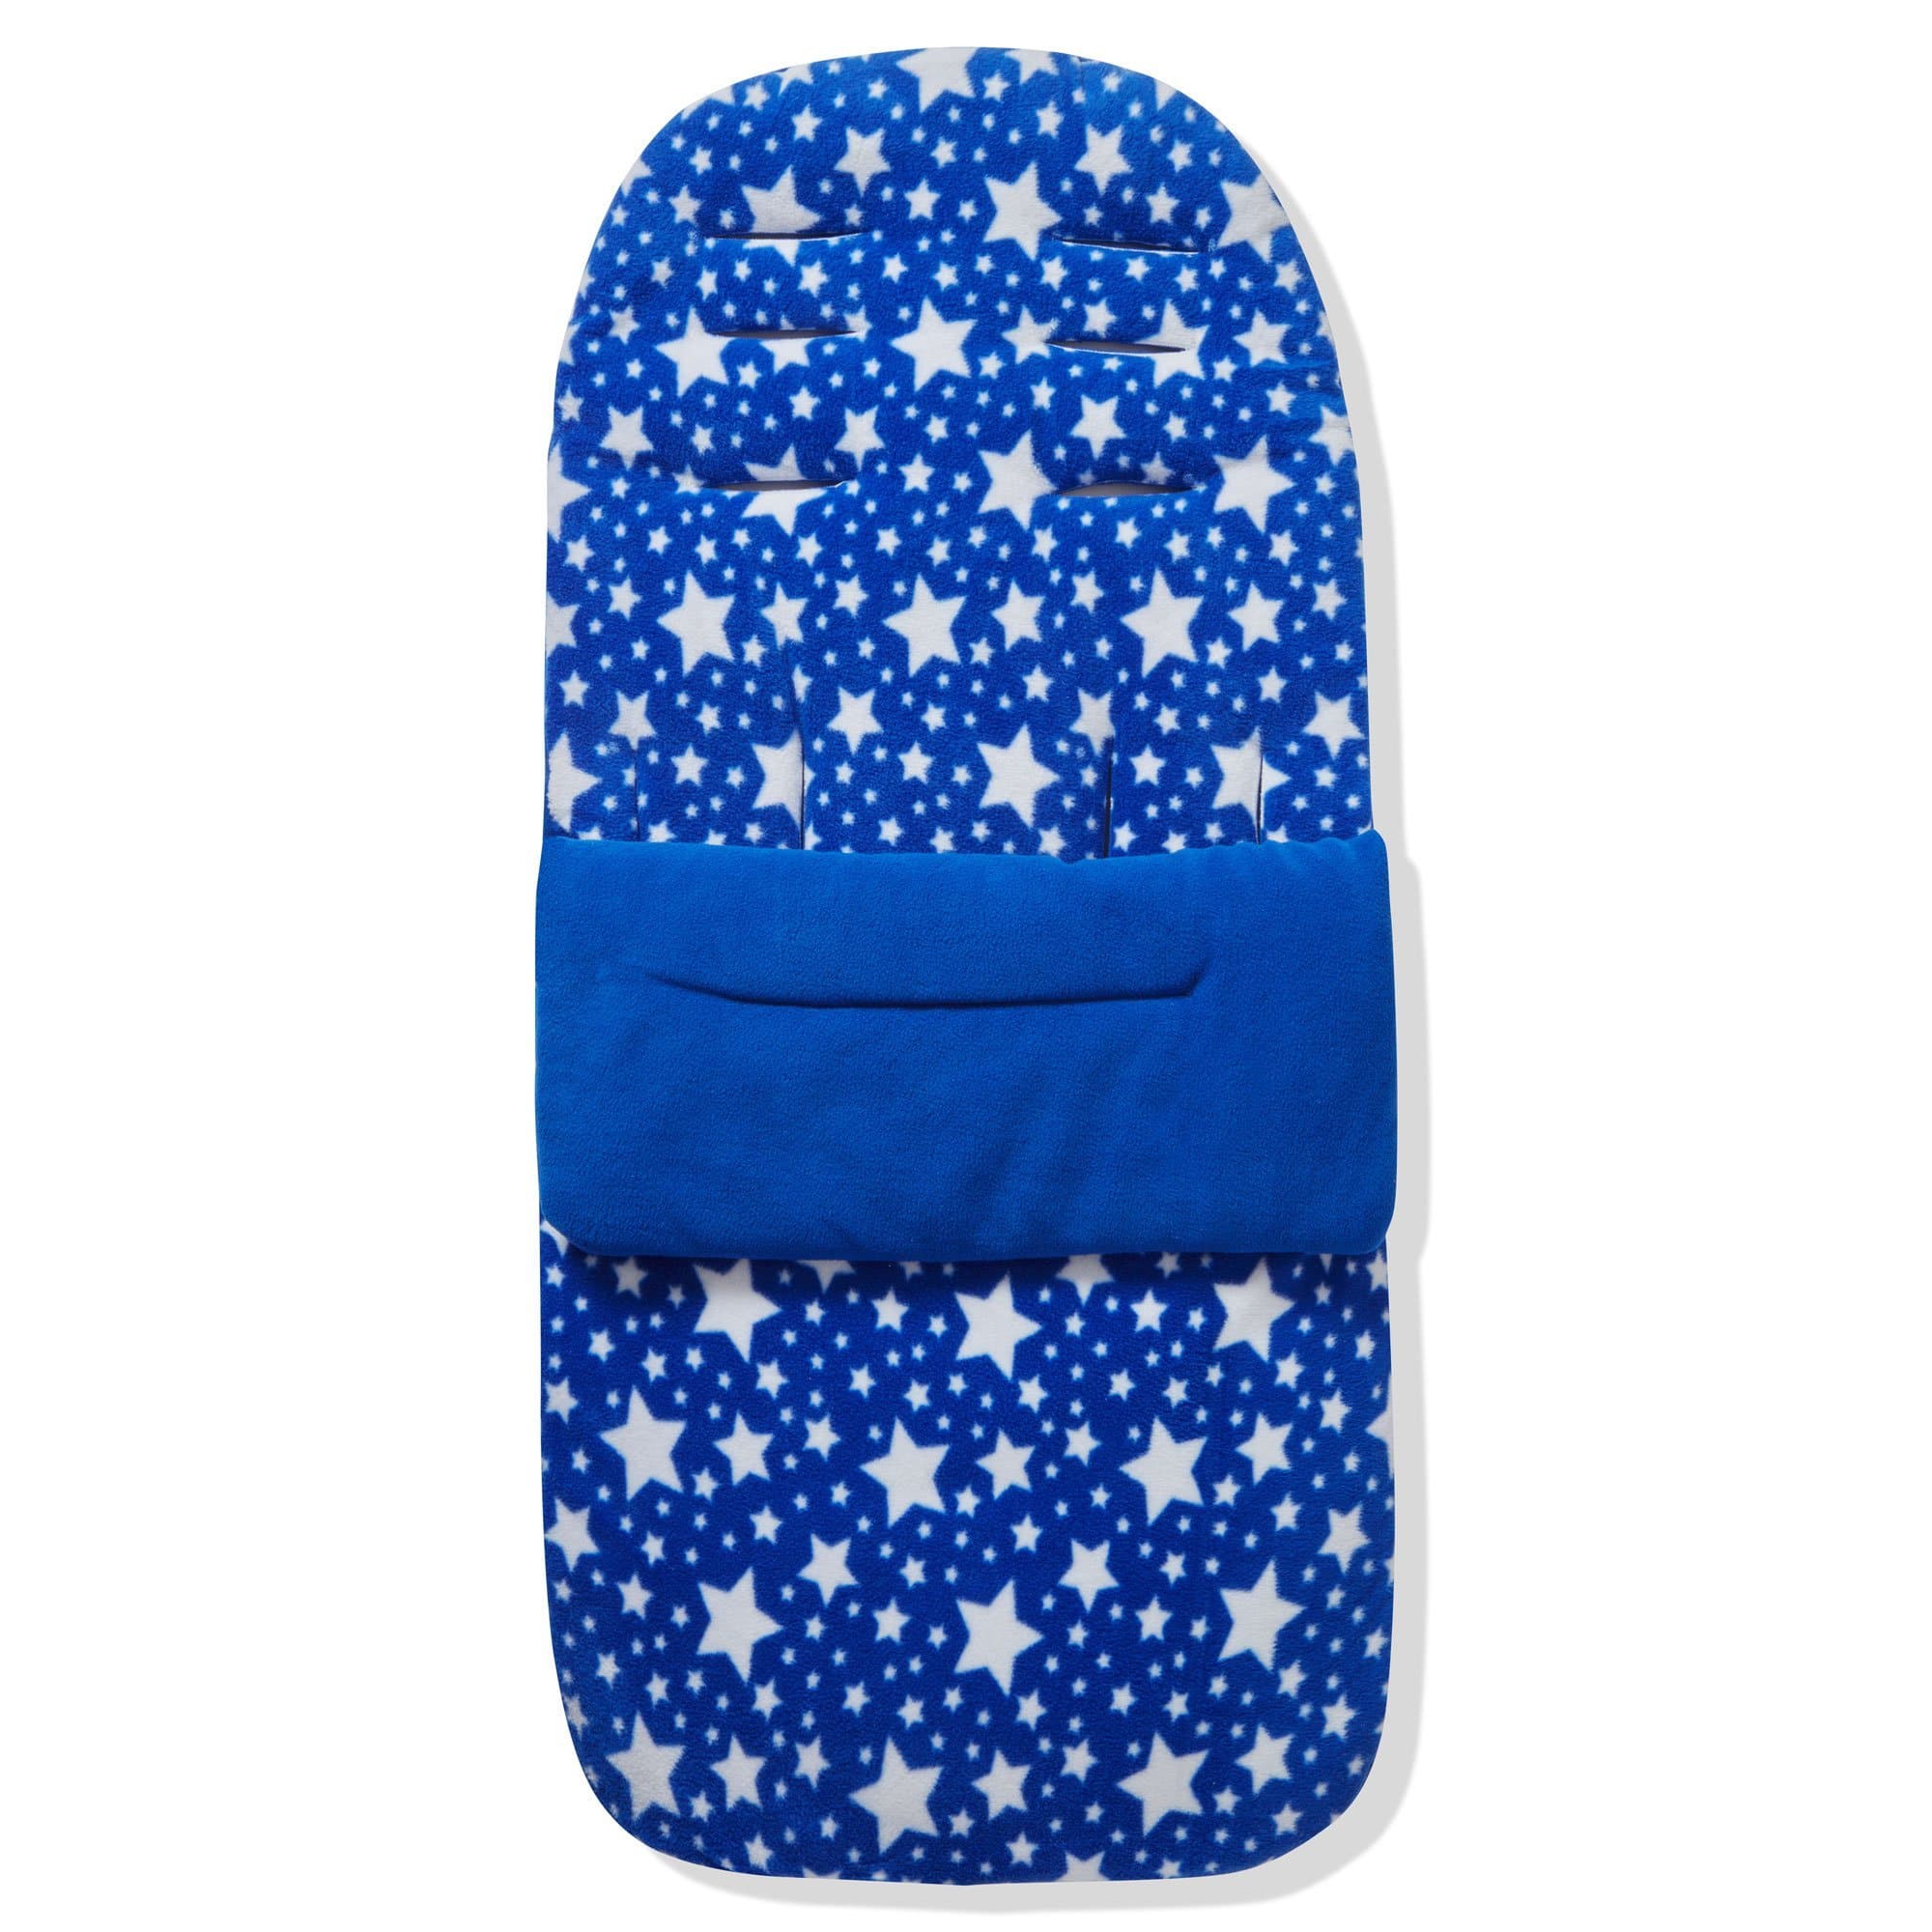 Fleece Footmuff / Cosy Toes Compatible with Teutonia - Blue Star / Fits All Models | For Your Little One